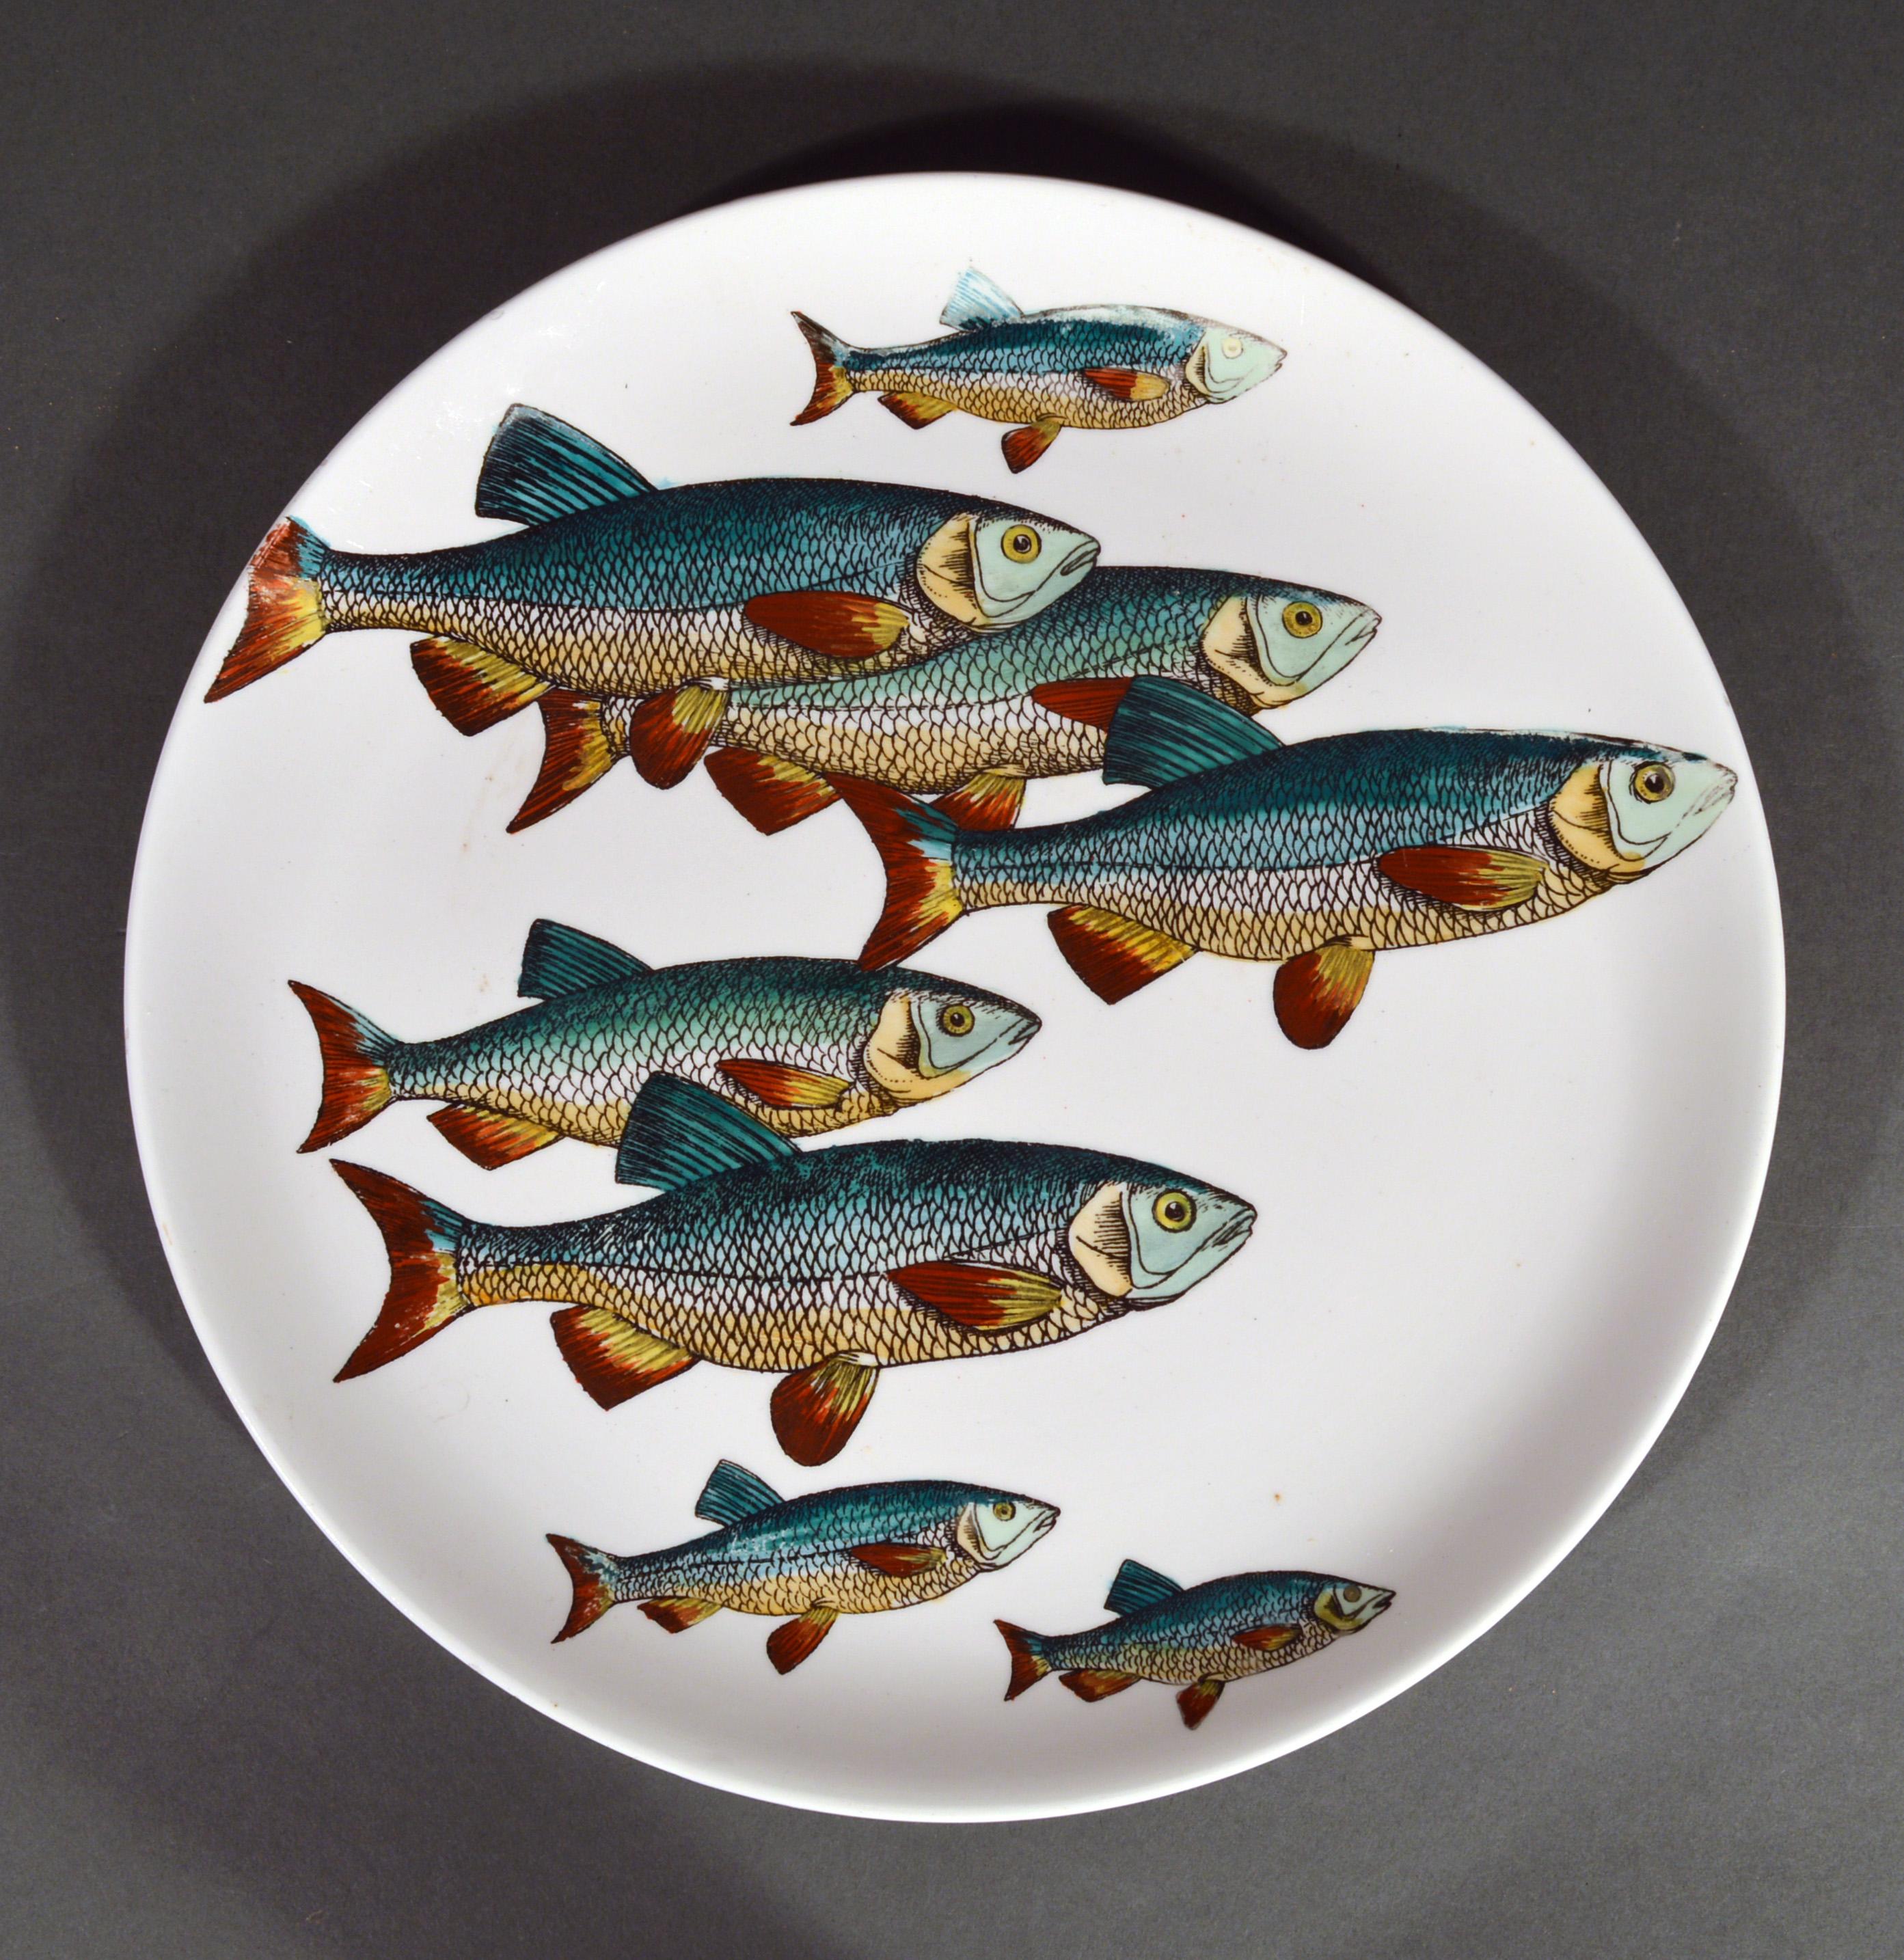 Piero Fornasetti Porcelain Fish Plates, Pesci pattern or Passage of Fish In Good Condition For Sale In Downingtown, PA